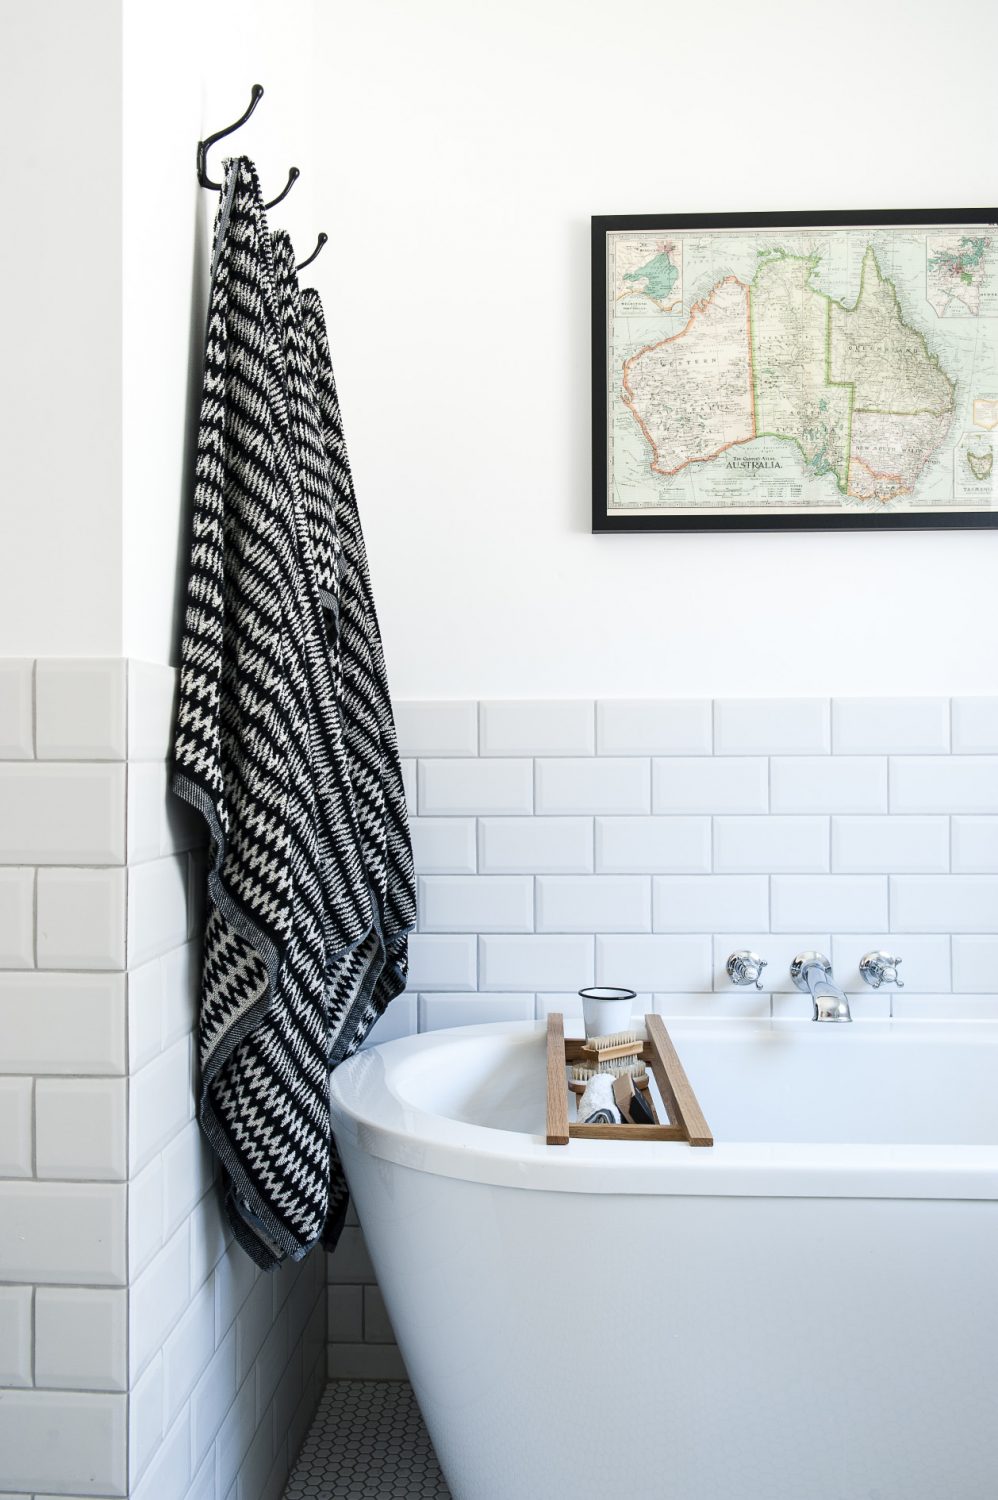 The bath in the ground floor master bathroom is from Patons of Walton and the black and white towels are from House of Fraser. The map of Australia is a piece of wrapping paper from Willow & Stone, which Jenna had framed